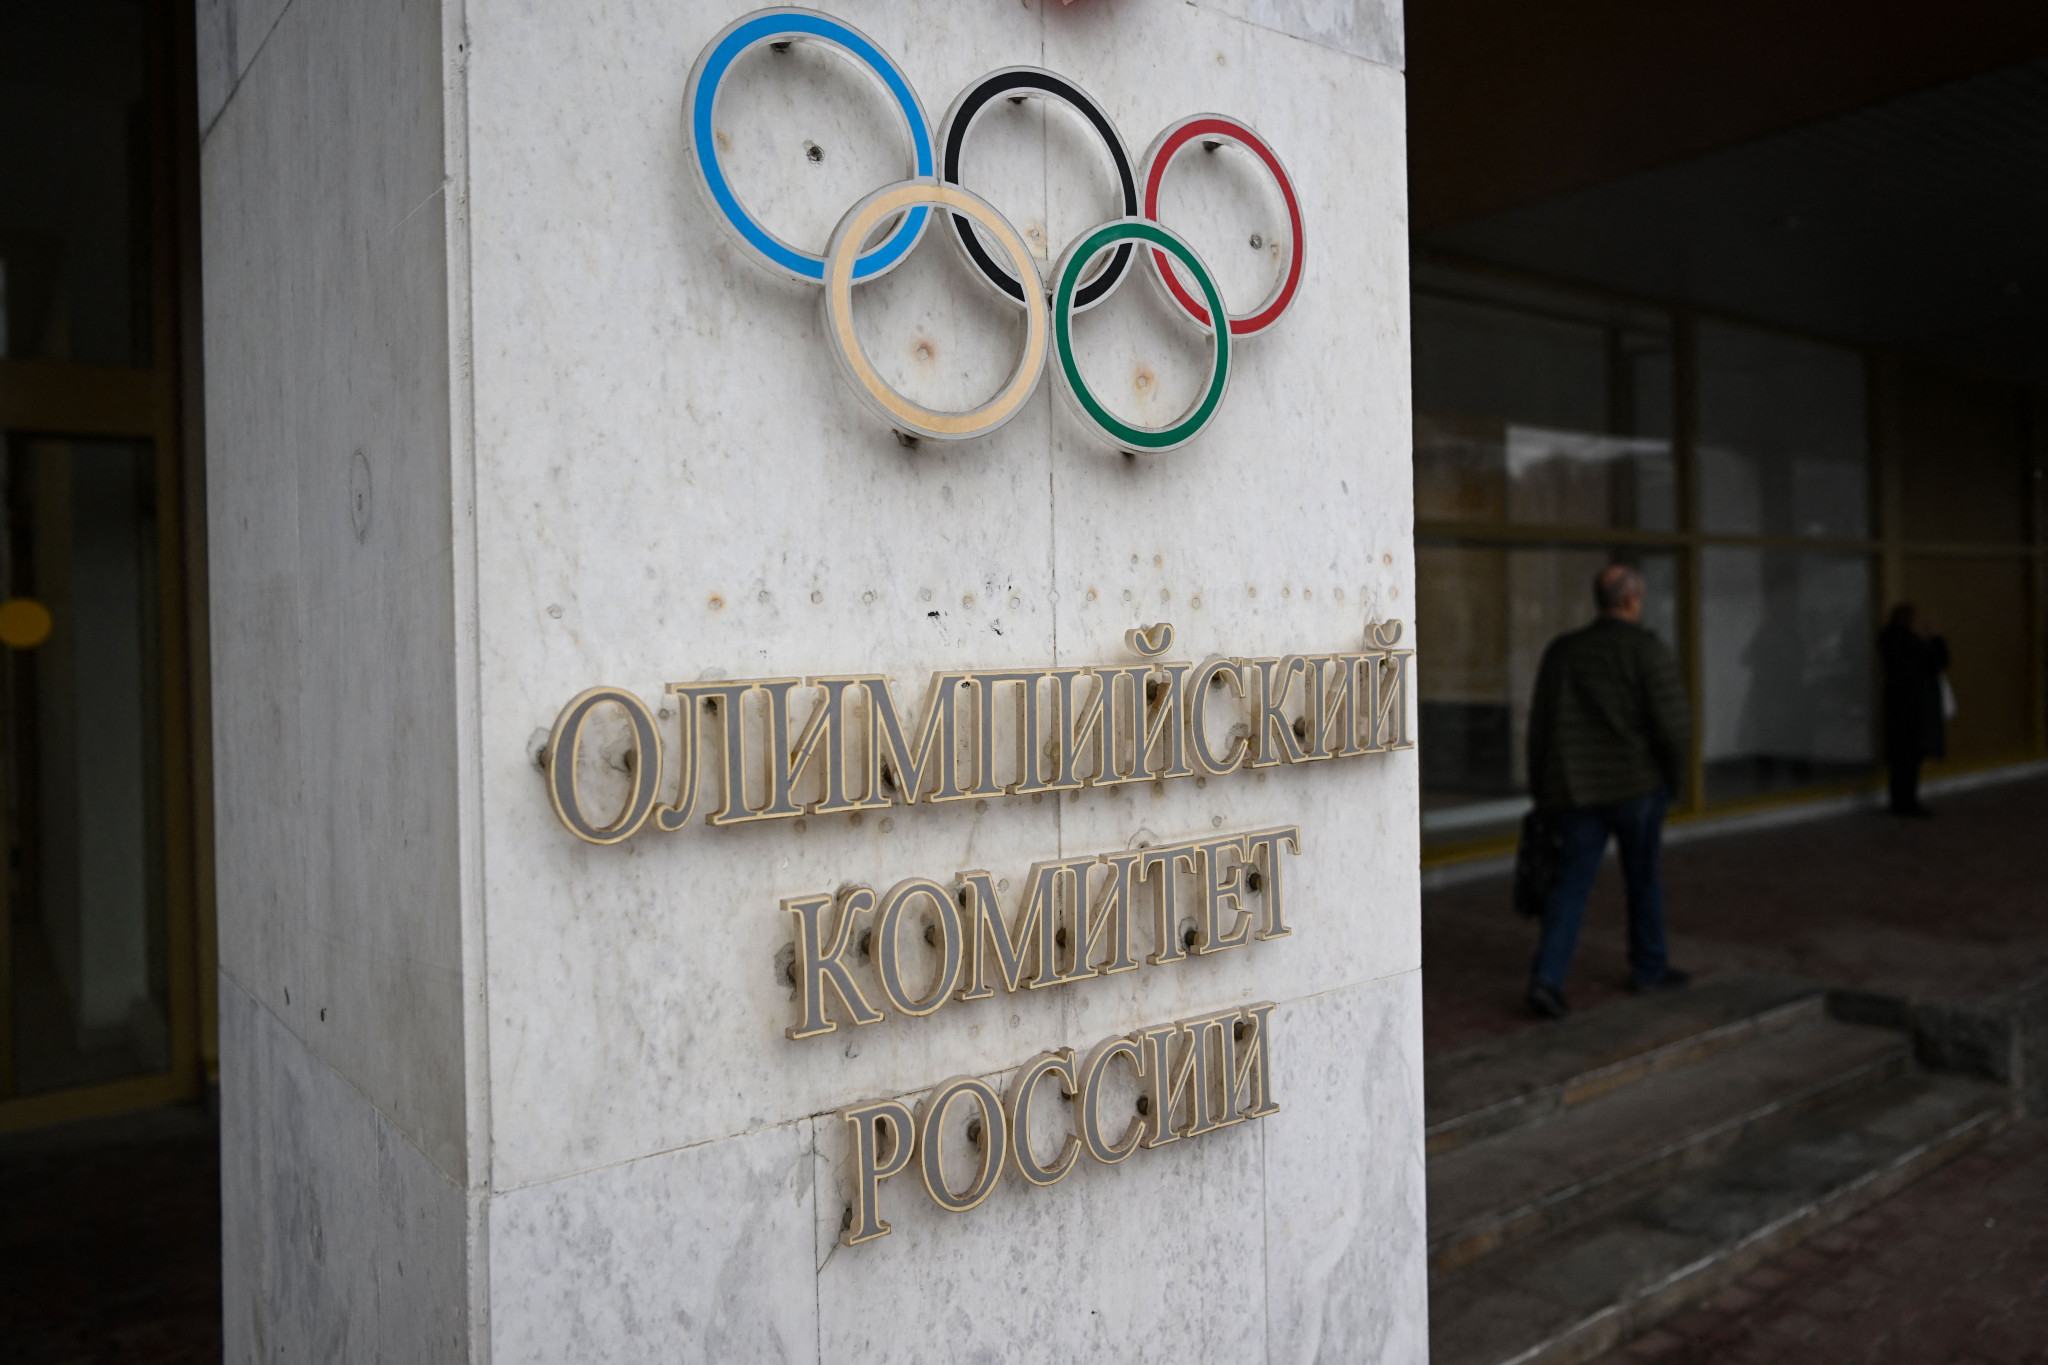 Russian and Belarusian athletes should make donation to Ukraine if cleared to compete, conference declaration says